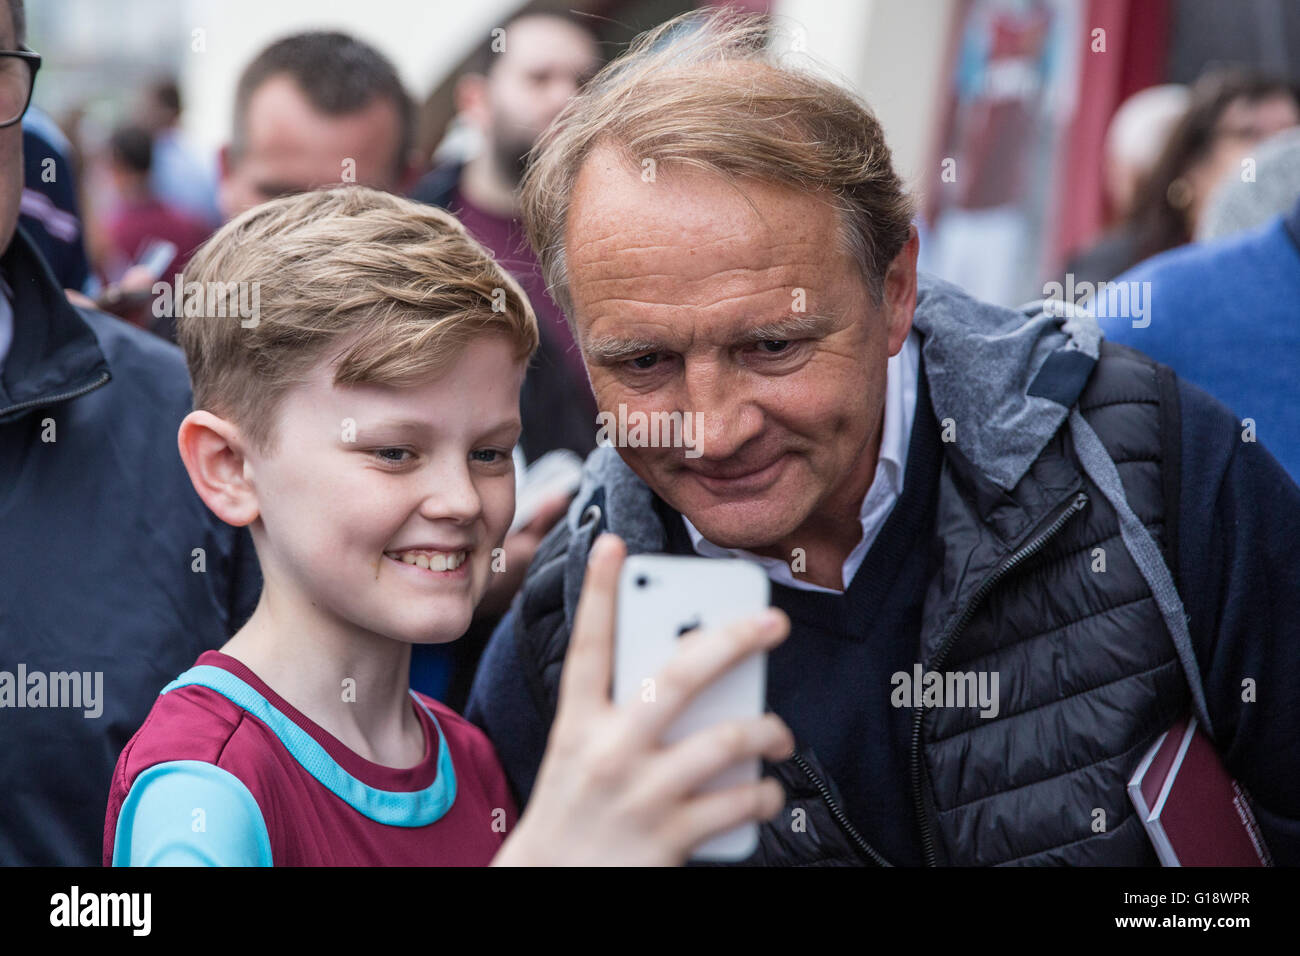 London, UK. 10th May, 2016. Paul Goddard, who made 170 appearances for West Ham between 1980 and 1986, scoring 54 goals, poses for a photograph outside the Boleyn Ground before the last ever match at the stadium. Stock Photo